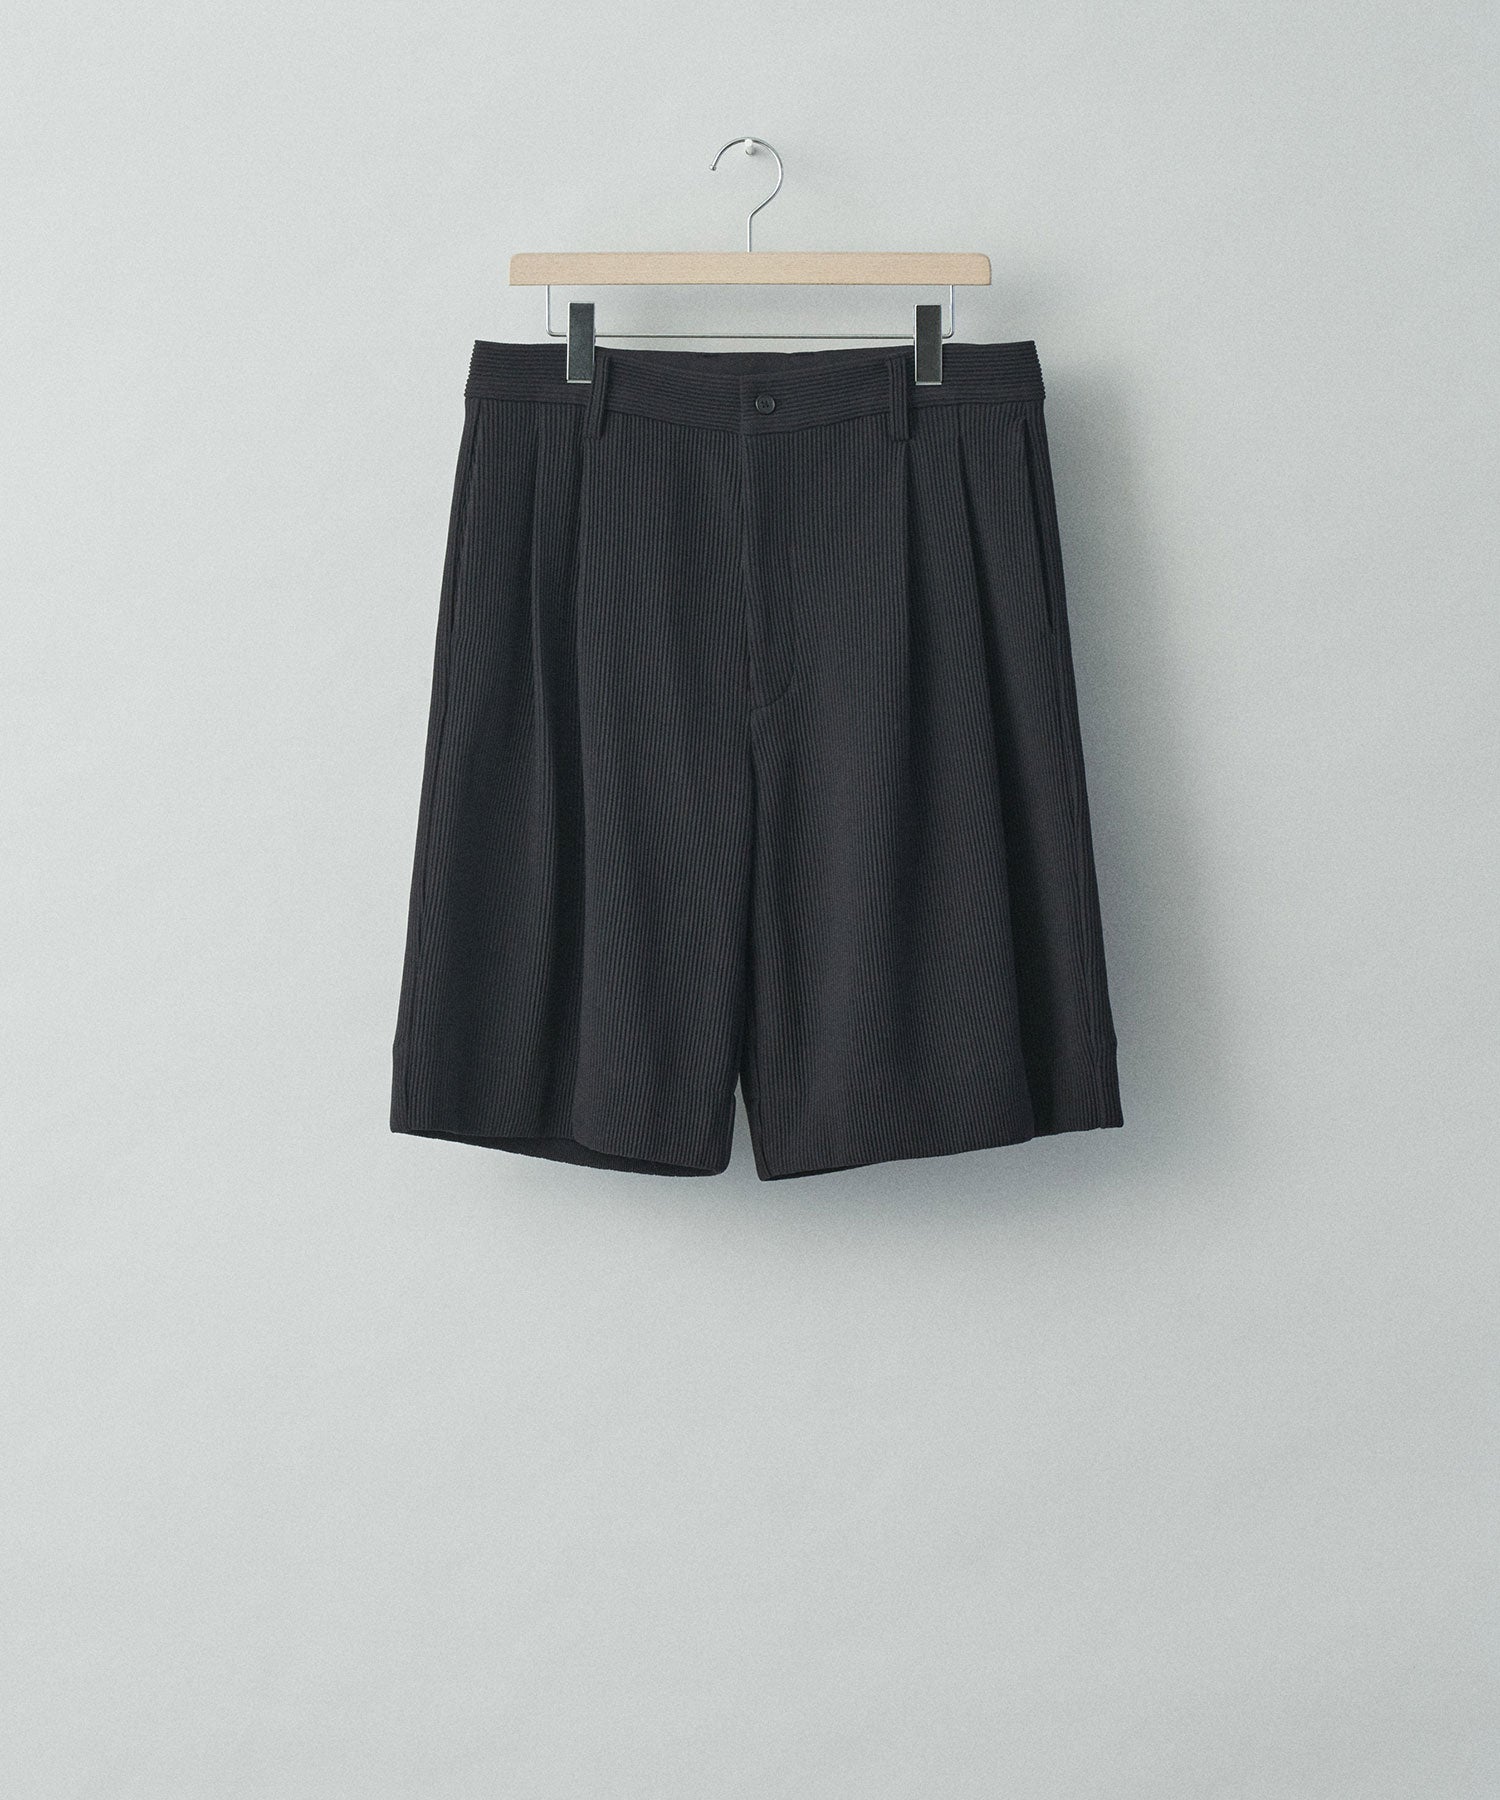 stein】GRADATION PLEATS SHORT TROUSERS | 公式通販サイト session